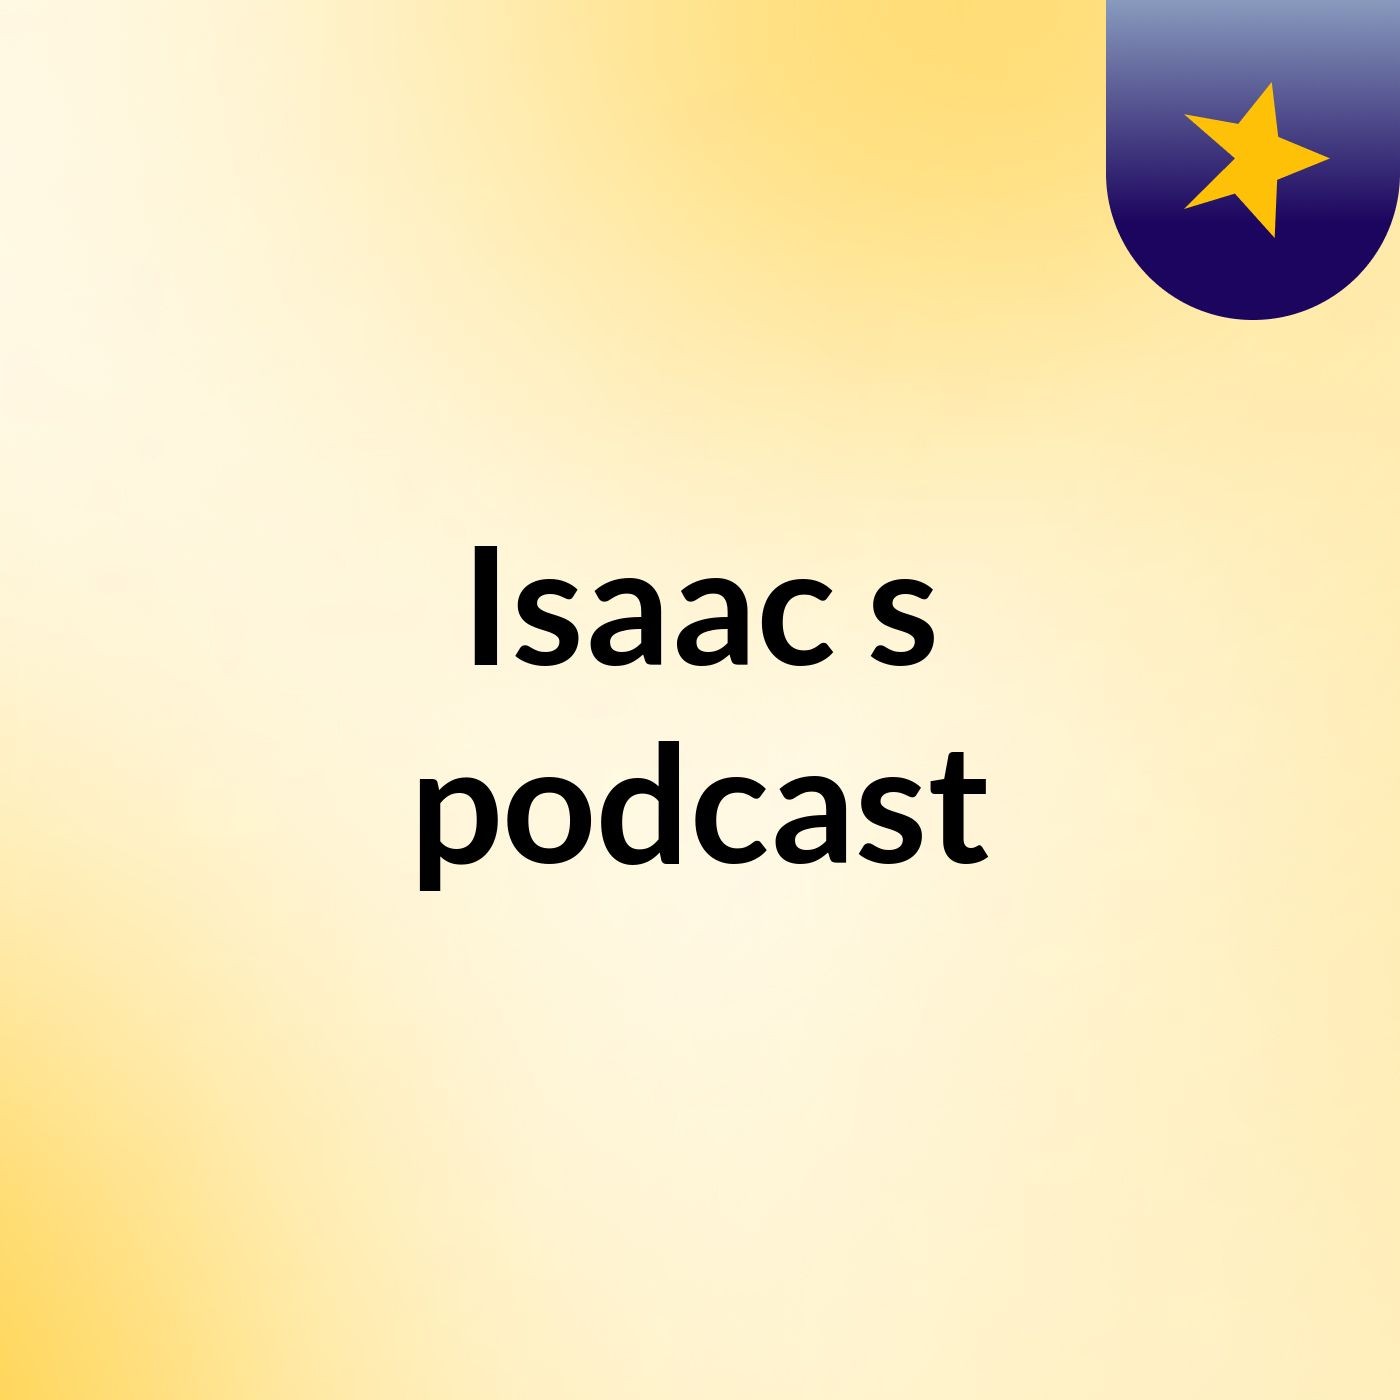 Isaac's podcast